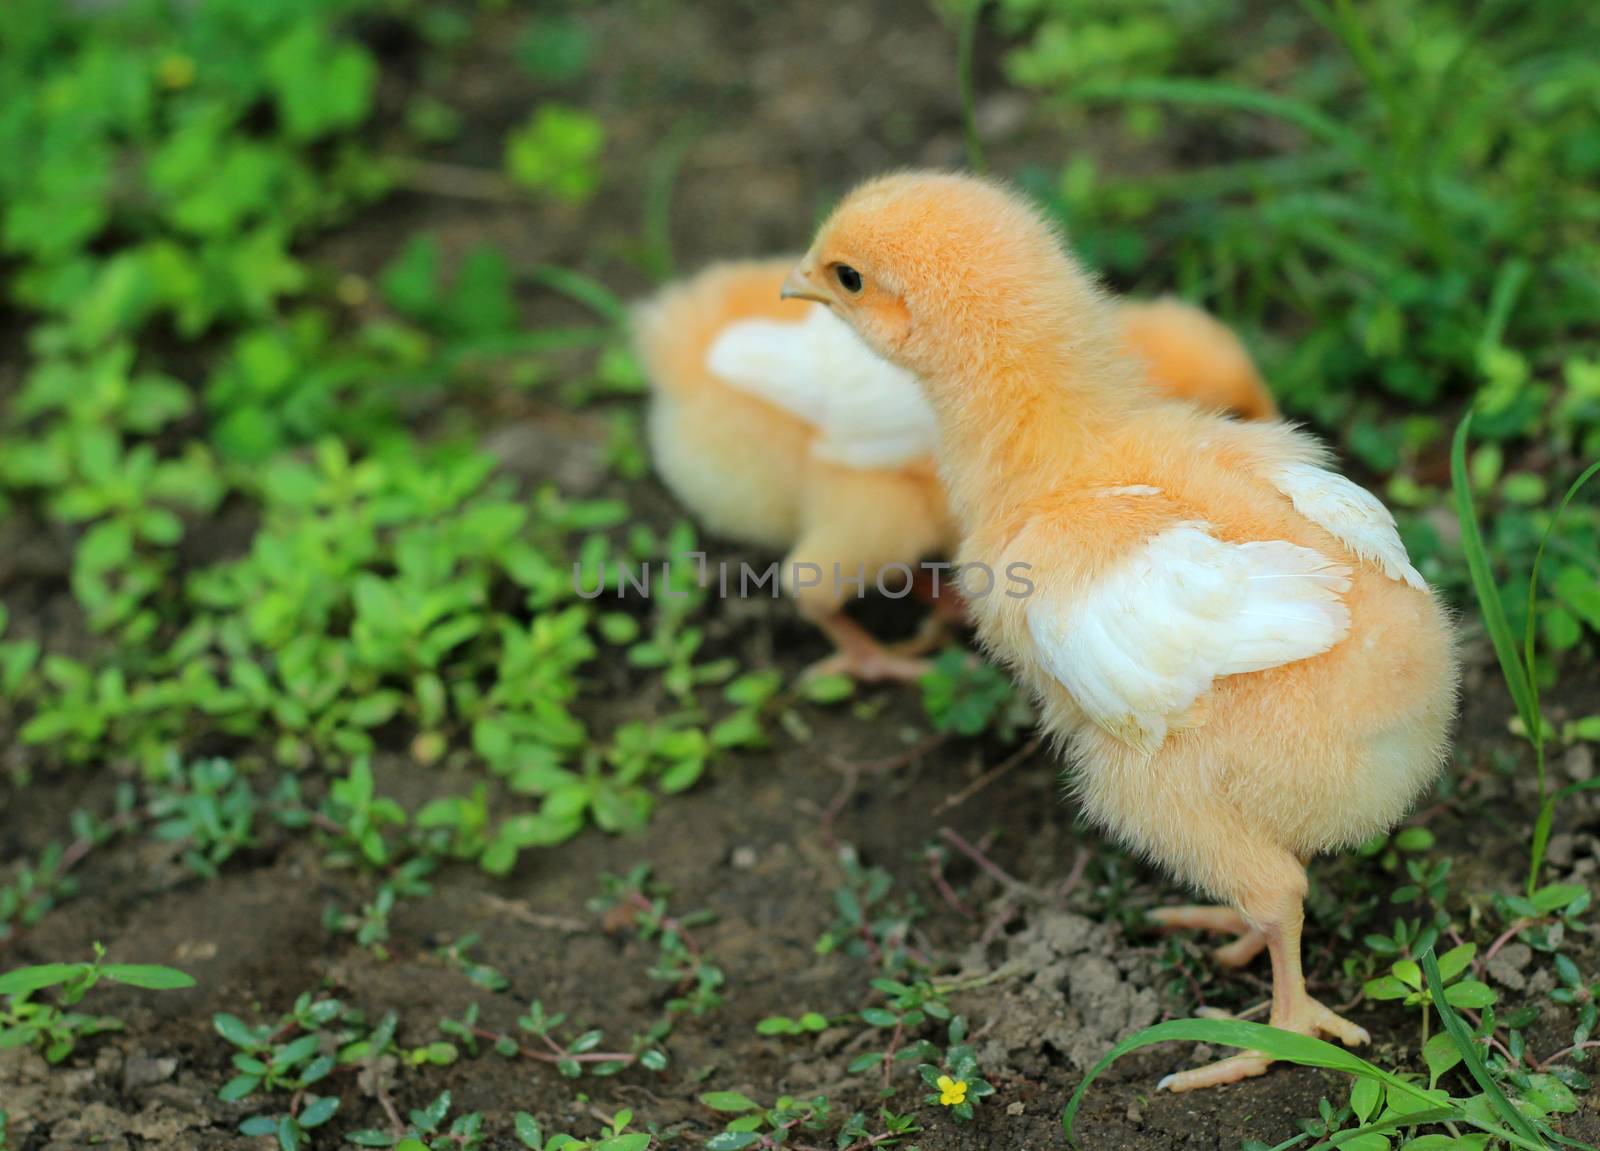 The image of a chick looking for food on the ground.